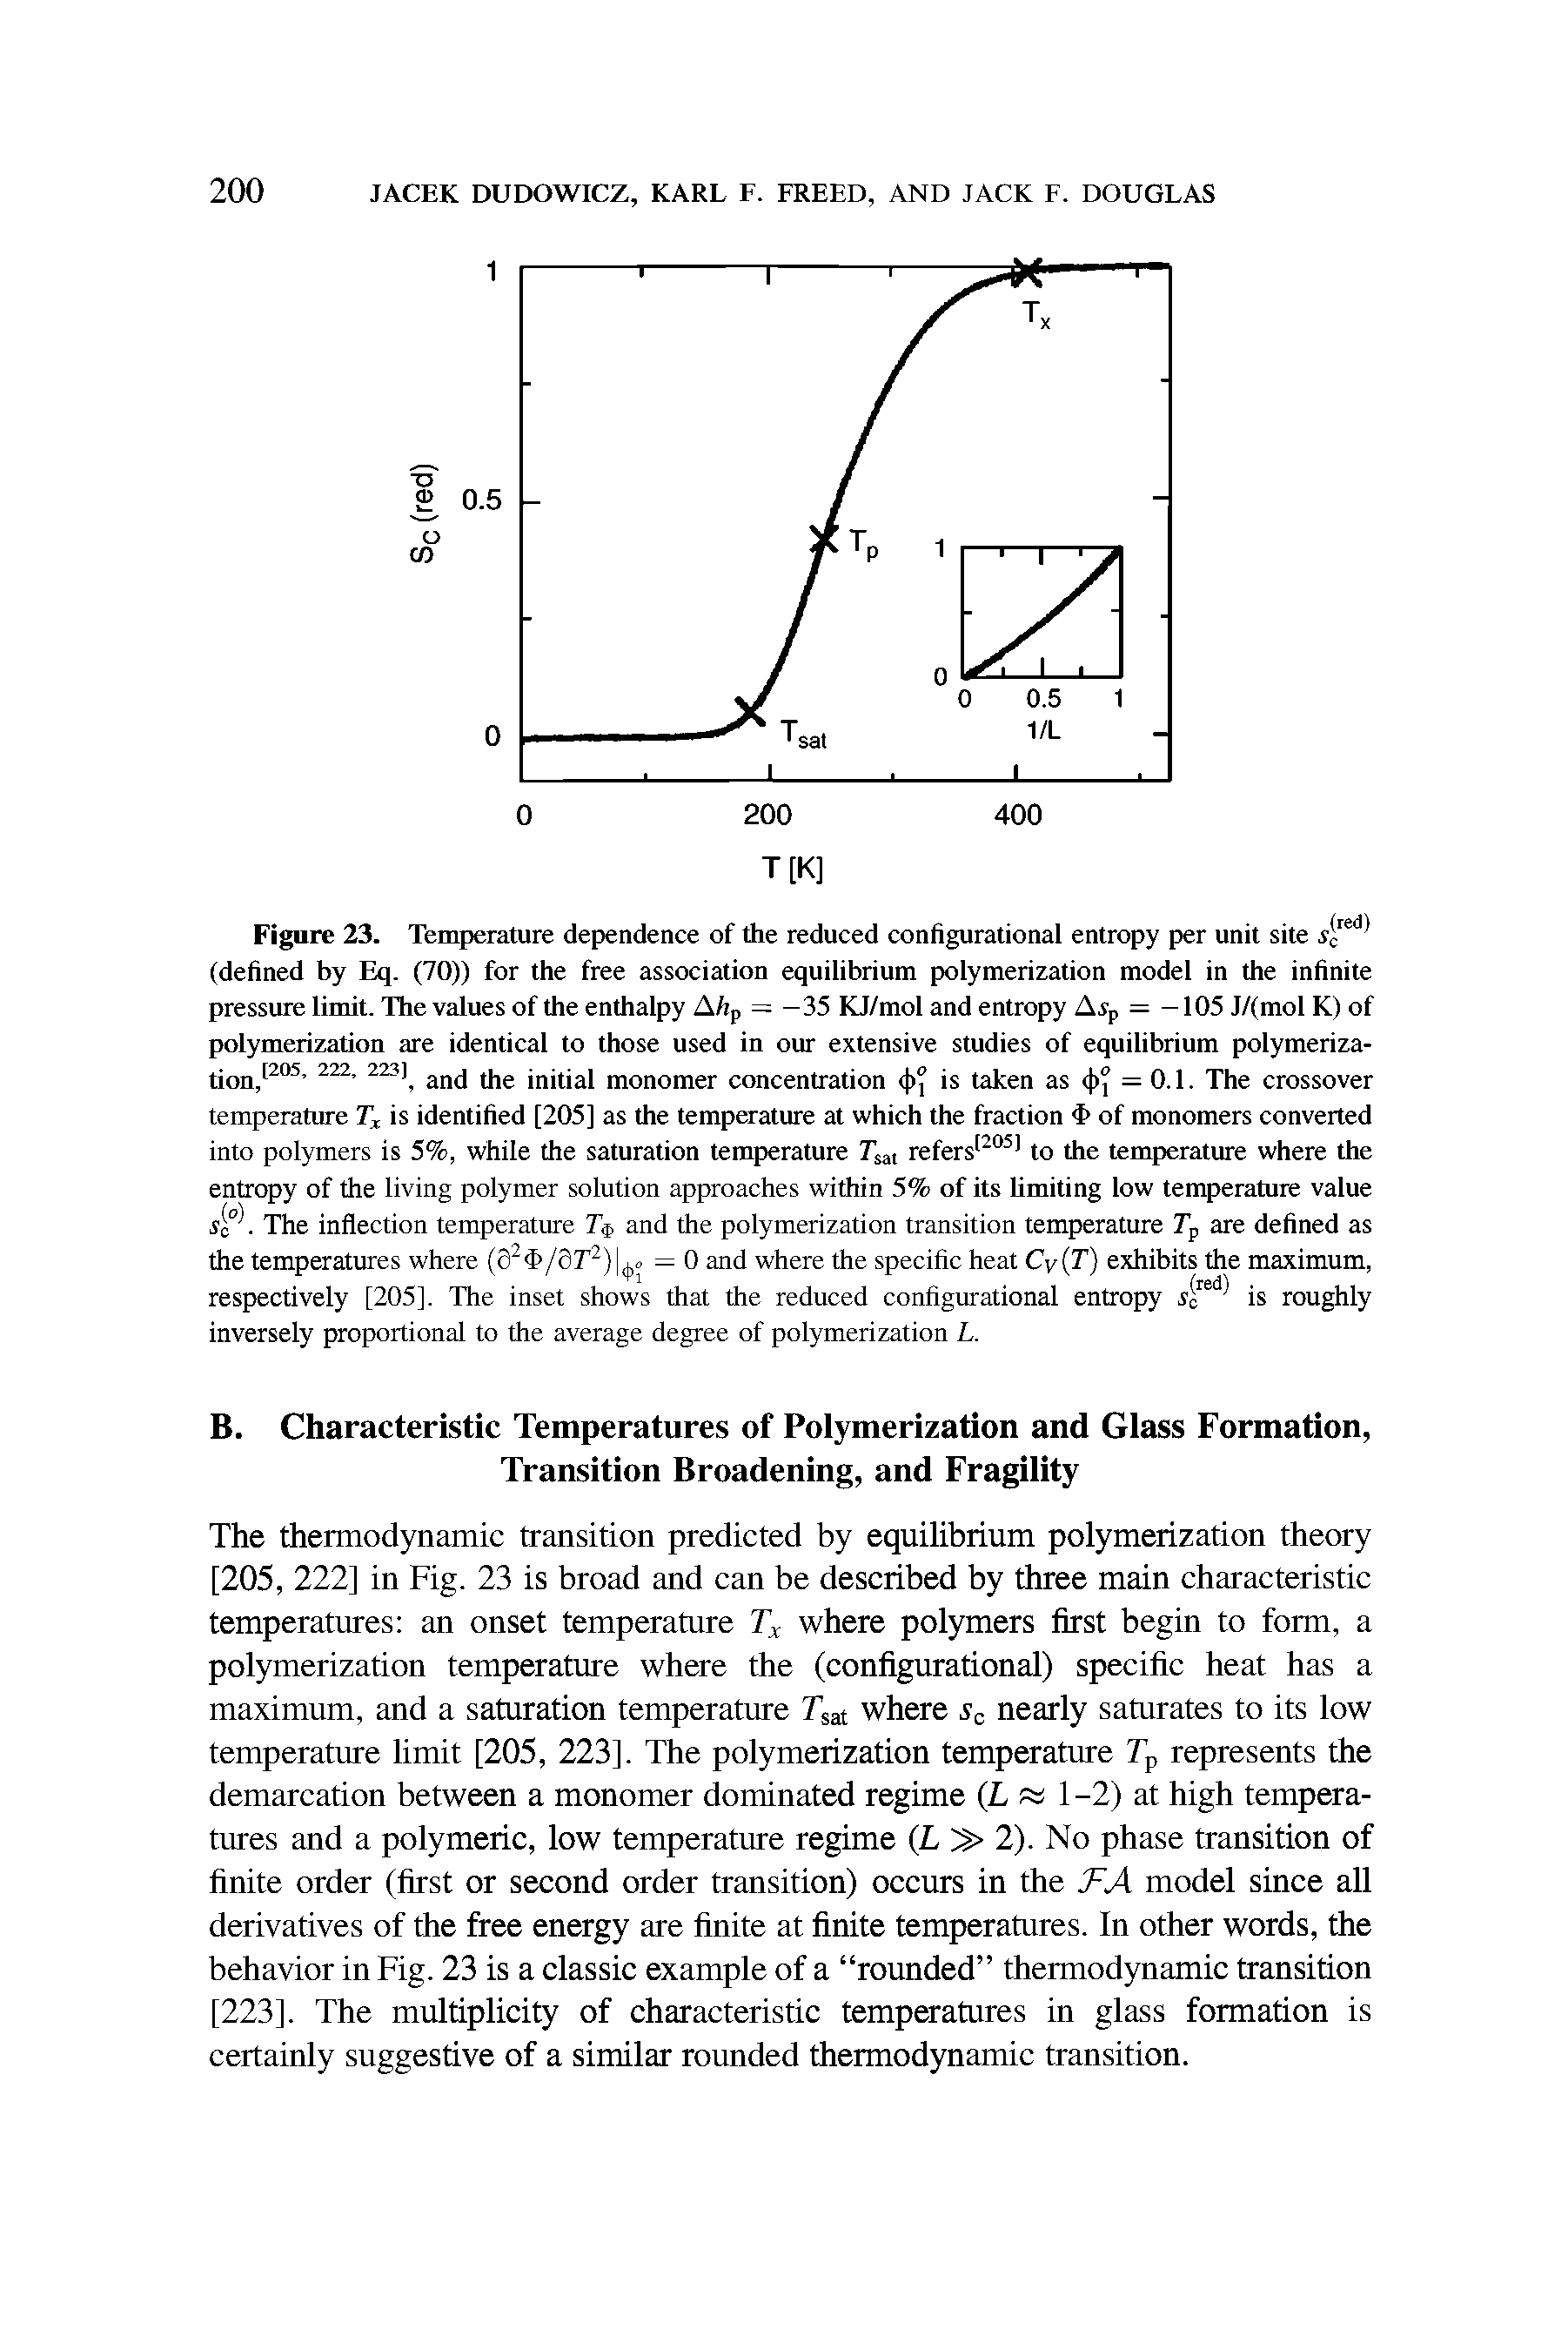 Figure 23. Temperature dependence of the reduced configurational entropy per unit site (defined by Eq. (70)) for the free association equilibrium polymerization model in the infinite pressure limit. The values of the enthalpy Afip = -35 KJ/mol and entropy Aip = -105 J/(mol K) of polymerization are identical to those used iu our extensive studies of equilibrium polymeriza-tiou, and the initial monomer concentration 4)° is taken as 4)° = 0.1. The crossover...